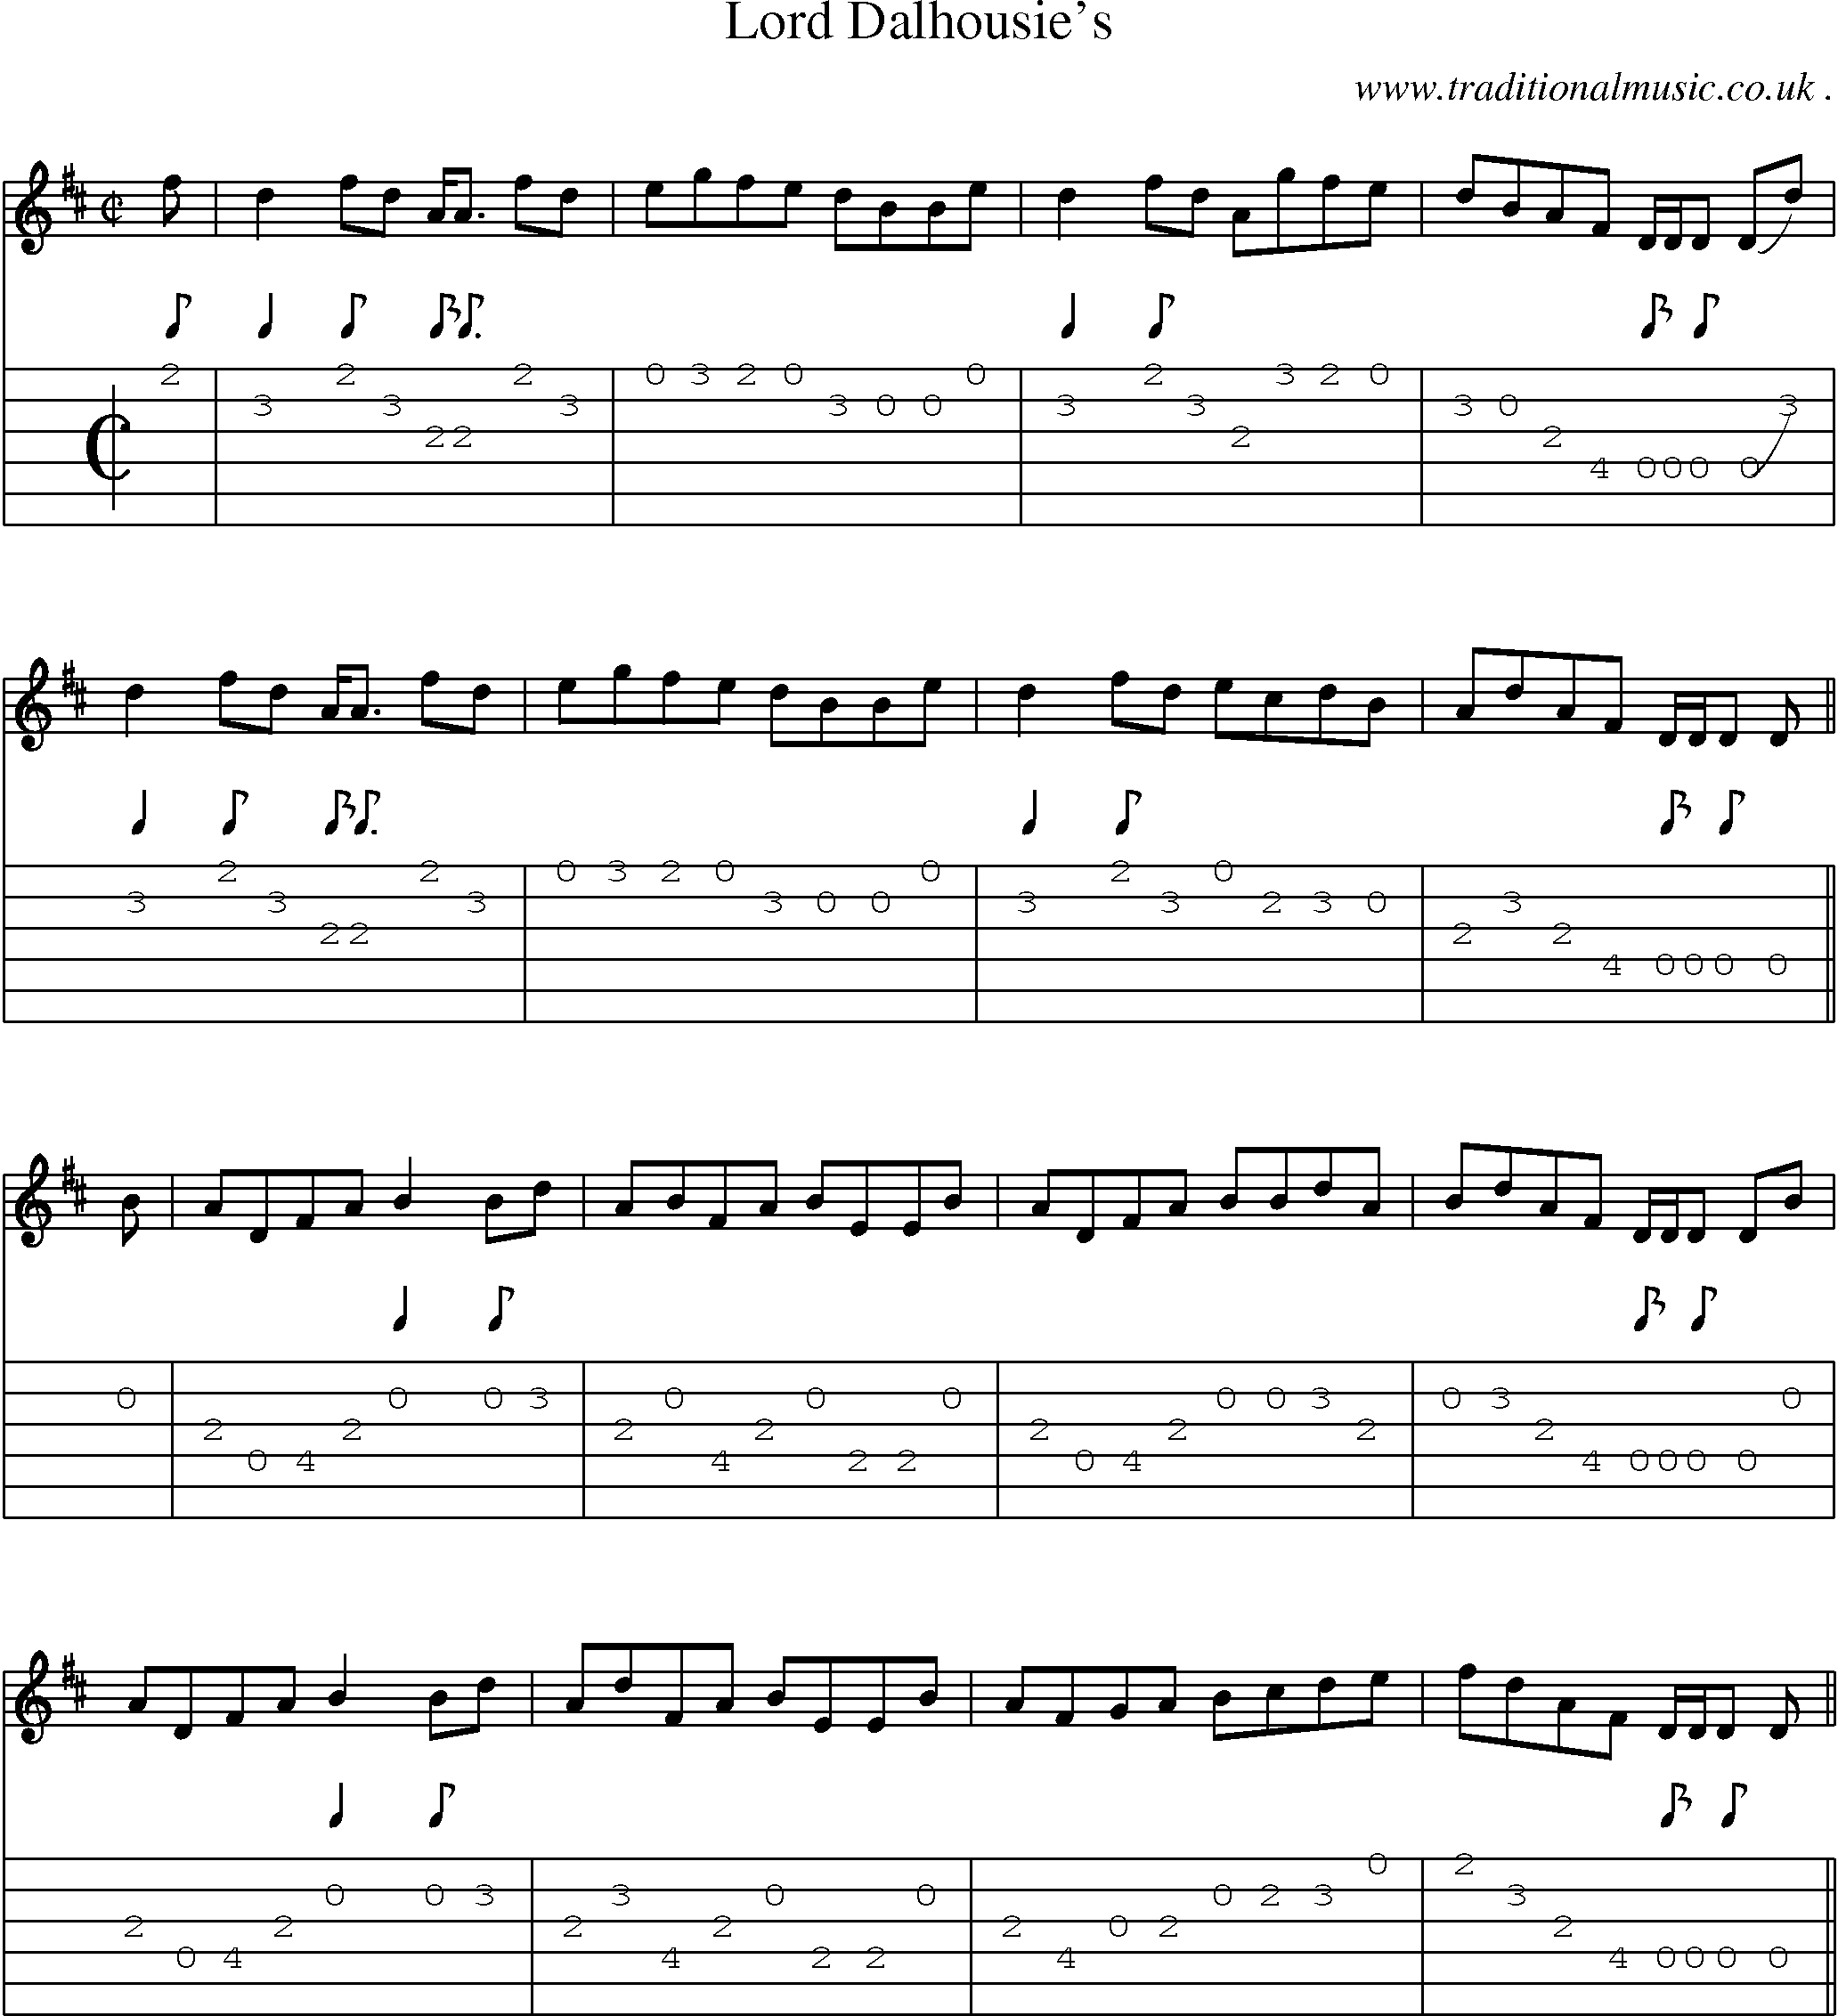 Sheet-Music and Guitar Tabs for Lord Dalhousies